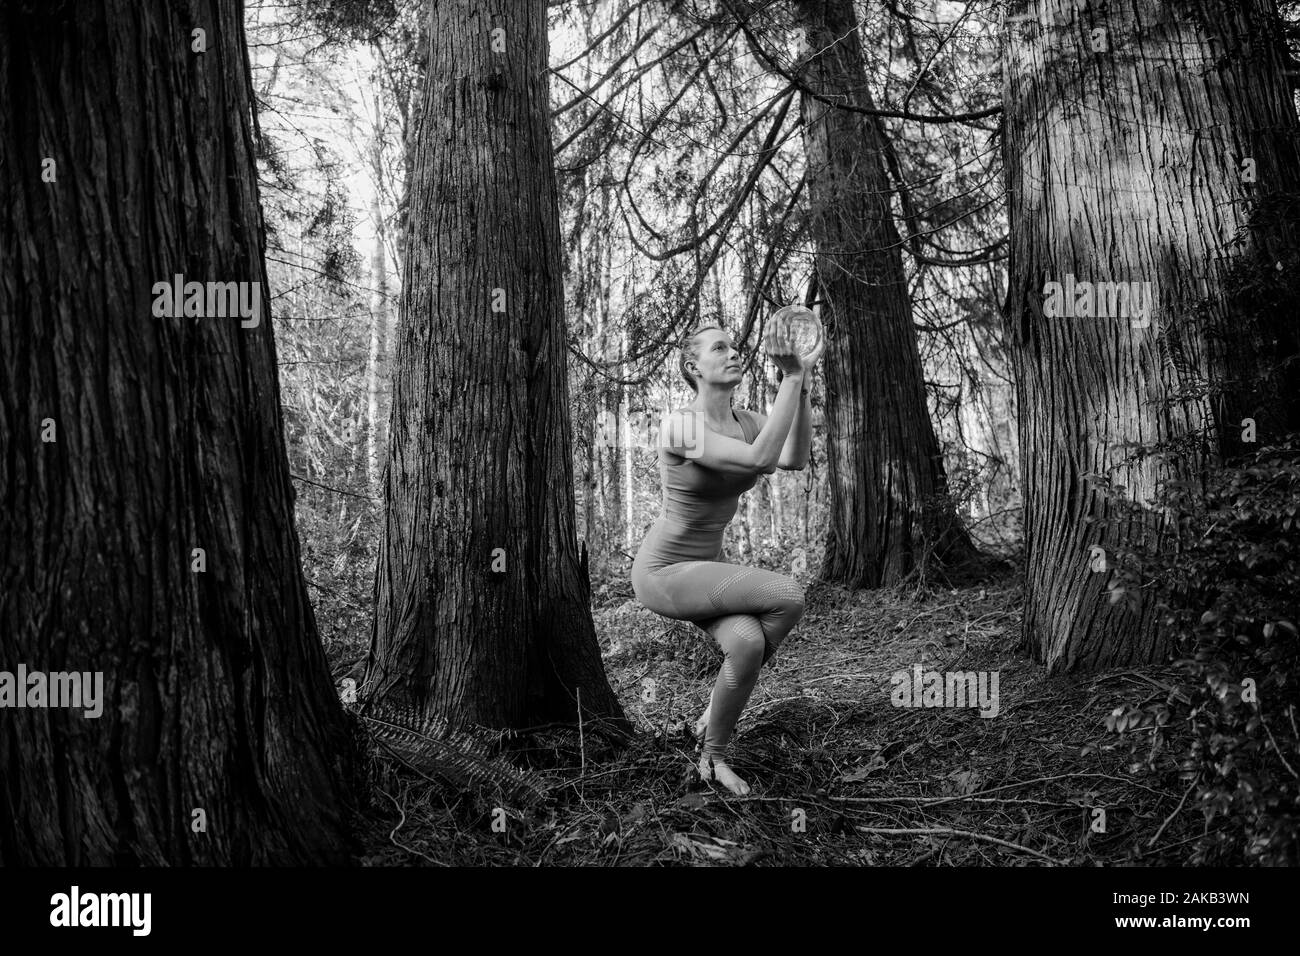 View of young woman in yoga pose in forest Stock Photo